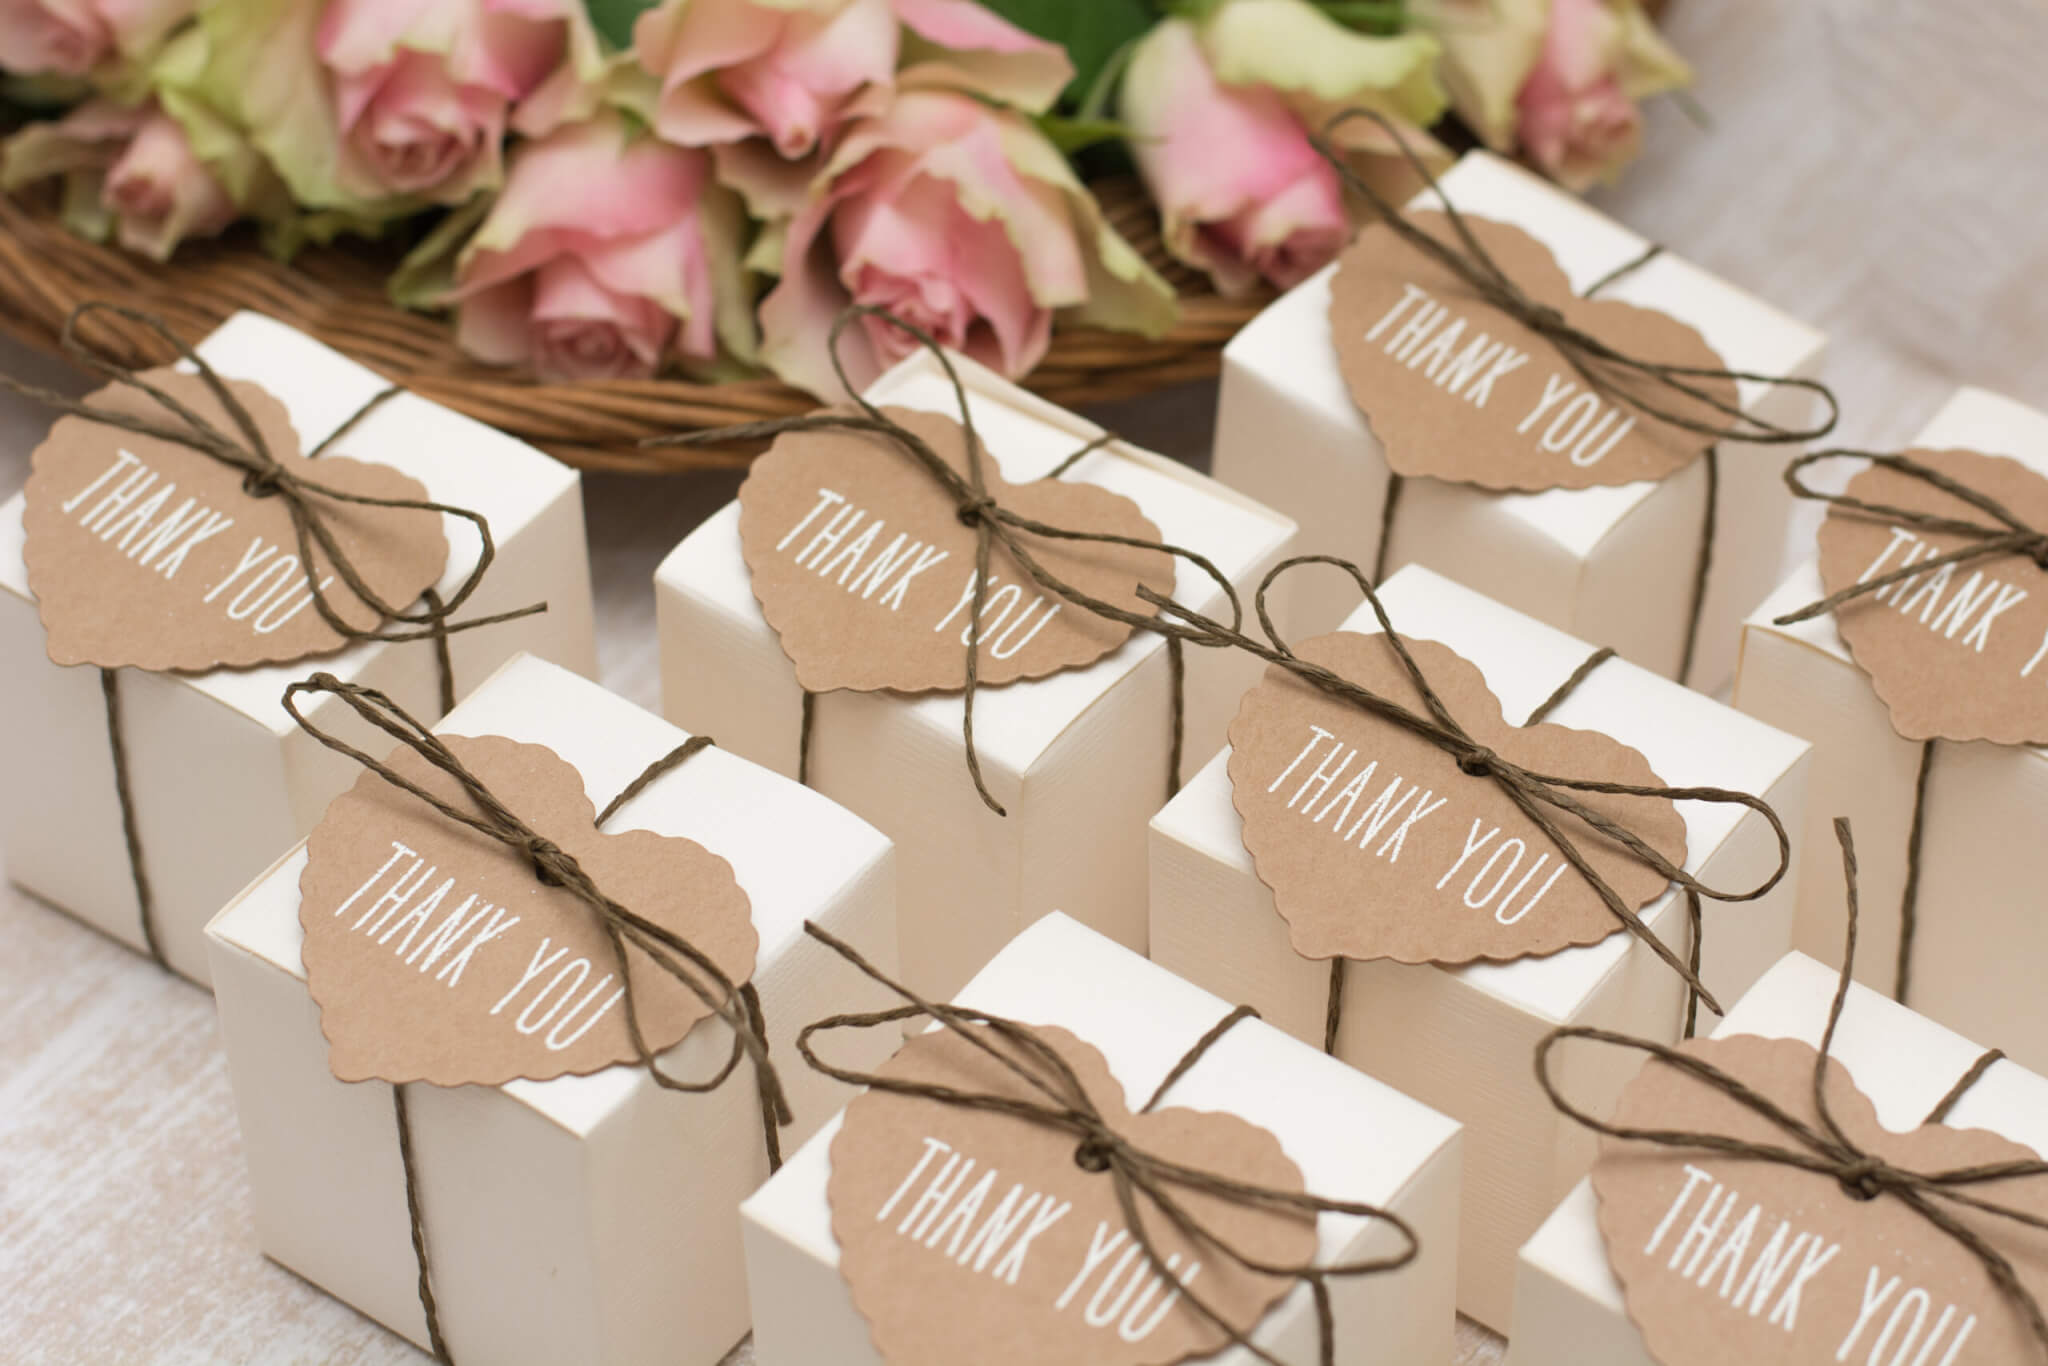 5 Unique Party Favors Your Guests Will LOVE